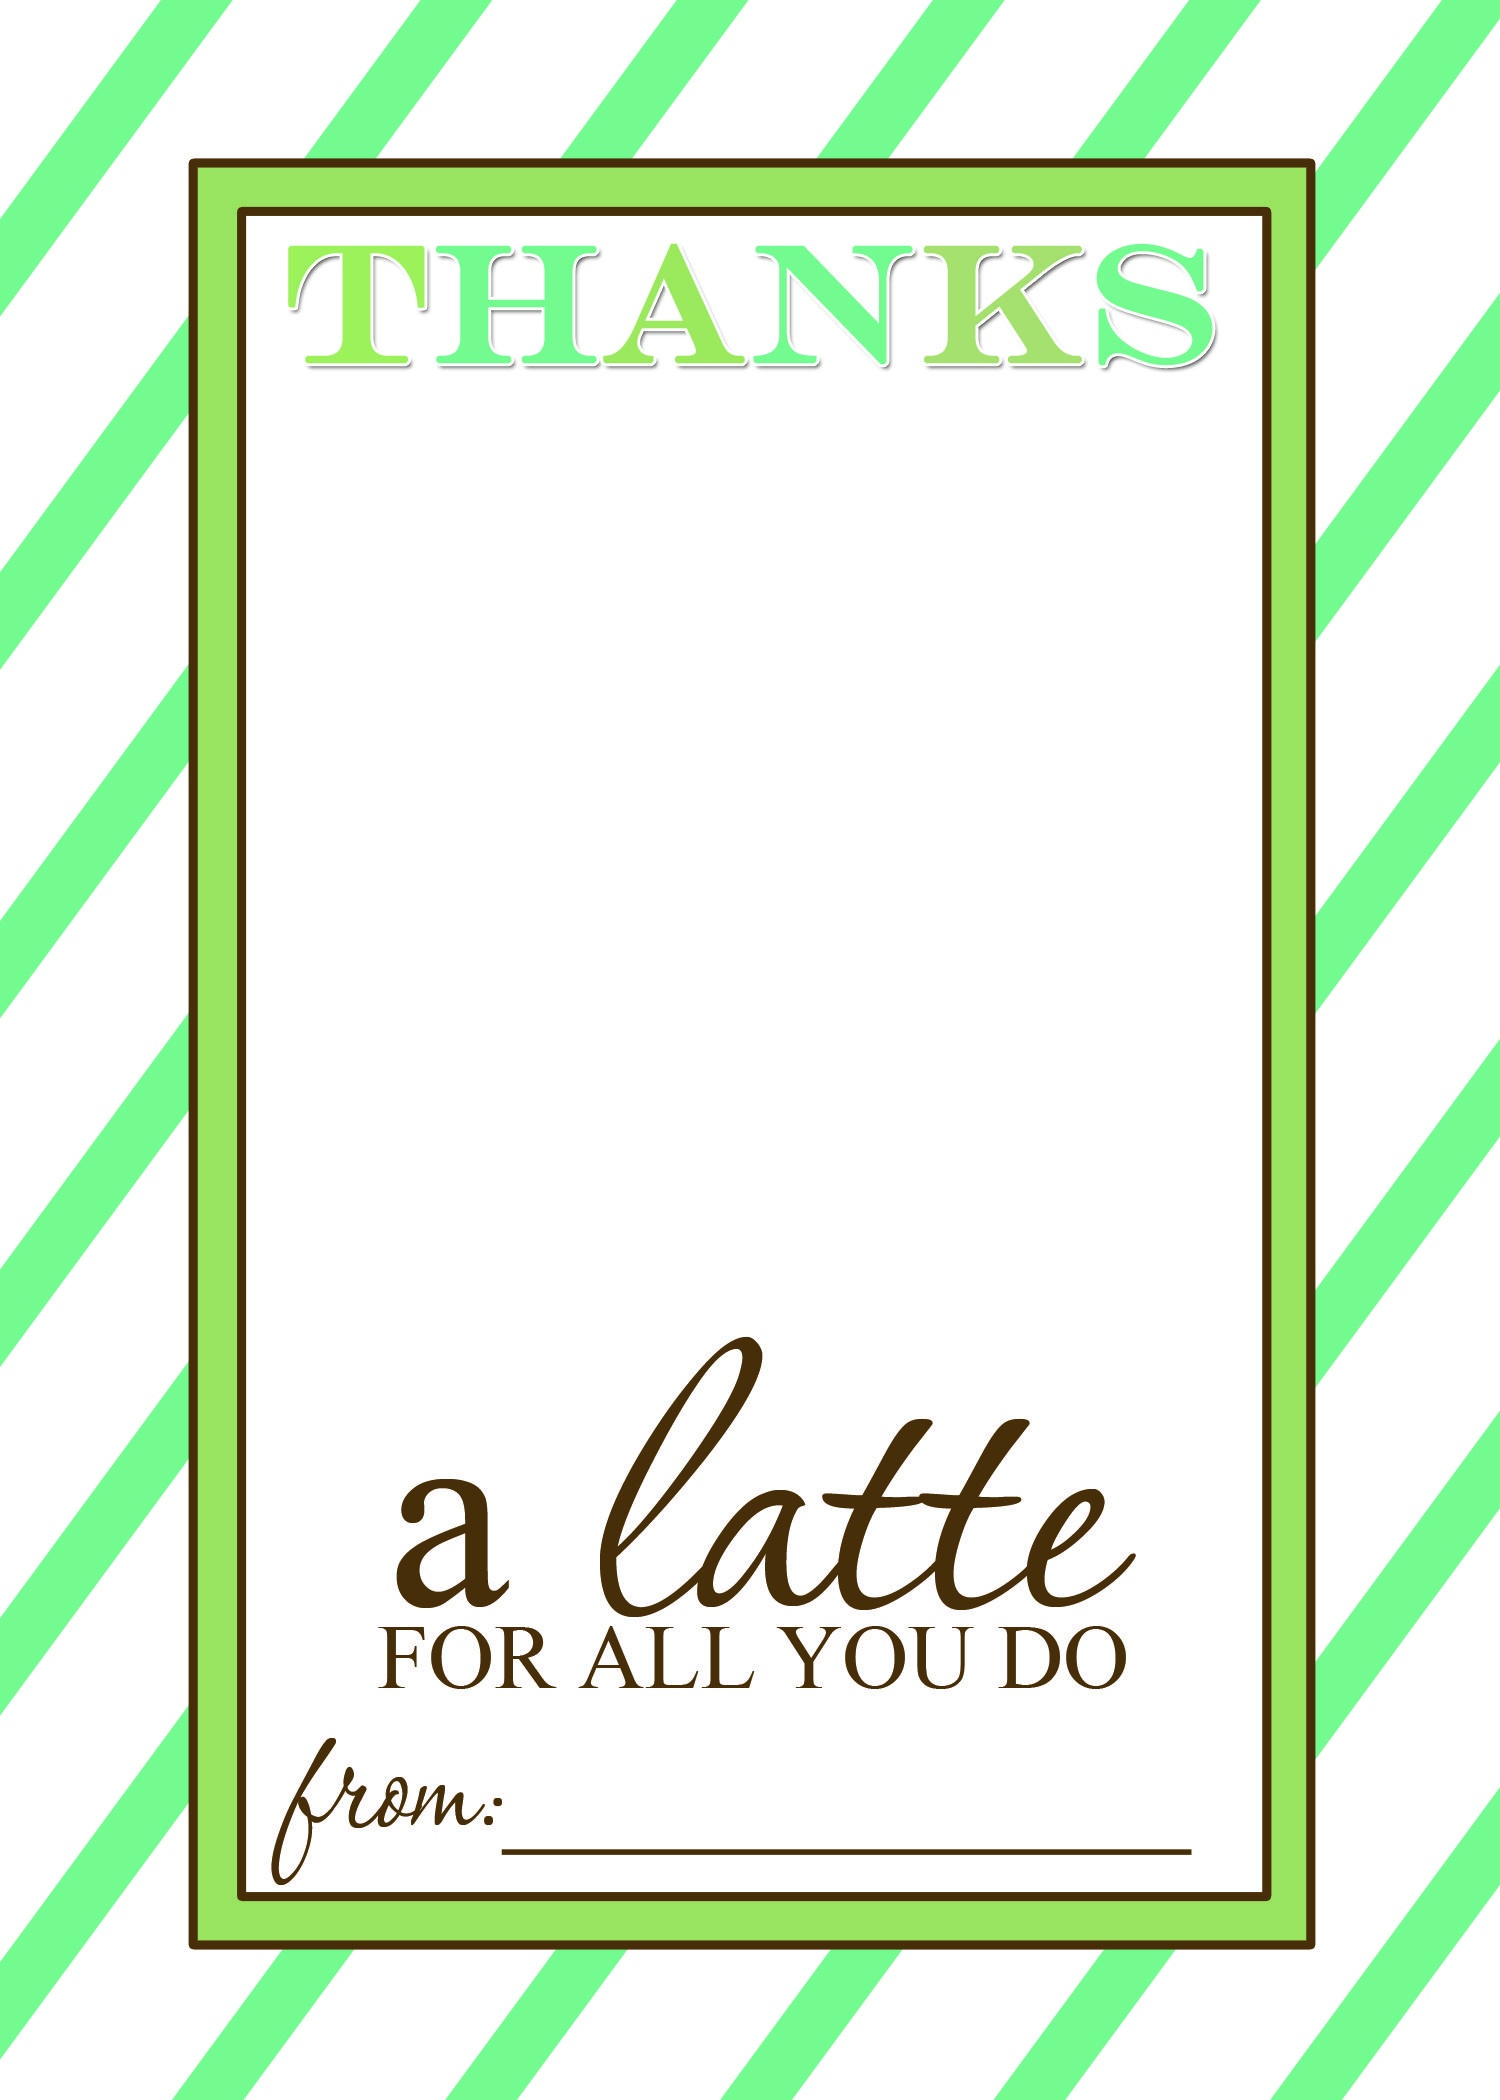 Thanks A Latte Free Printable Gift Card Holder Teacher Gift | Craft - Thanks A Latte Free Printable Card